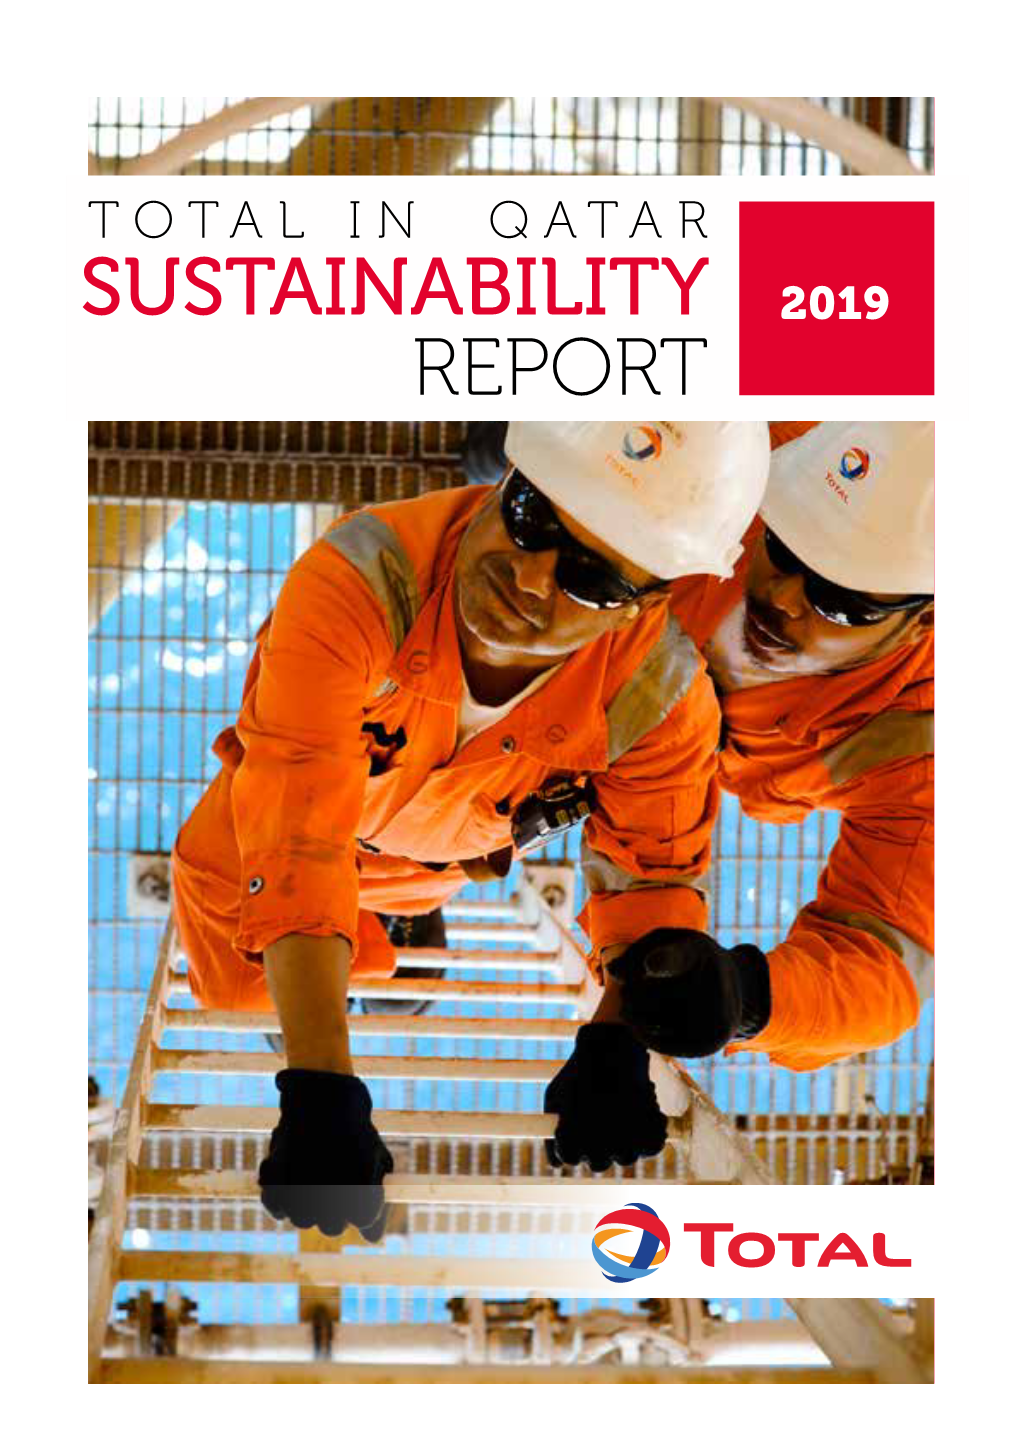 Total Qatar Sustainability Report 2019 Download